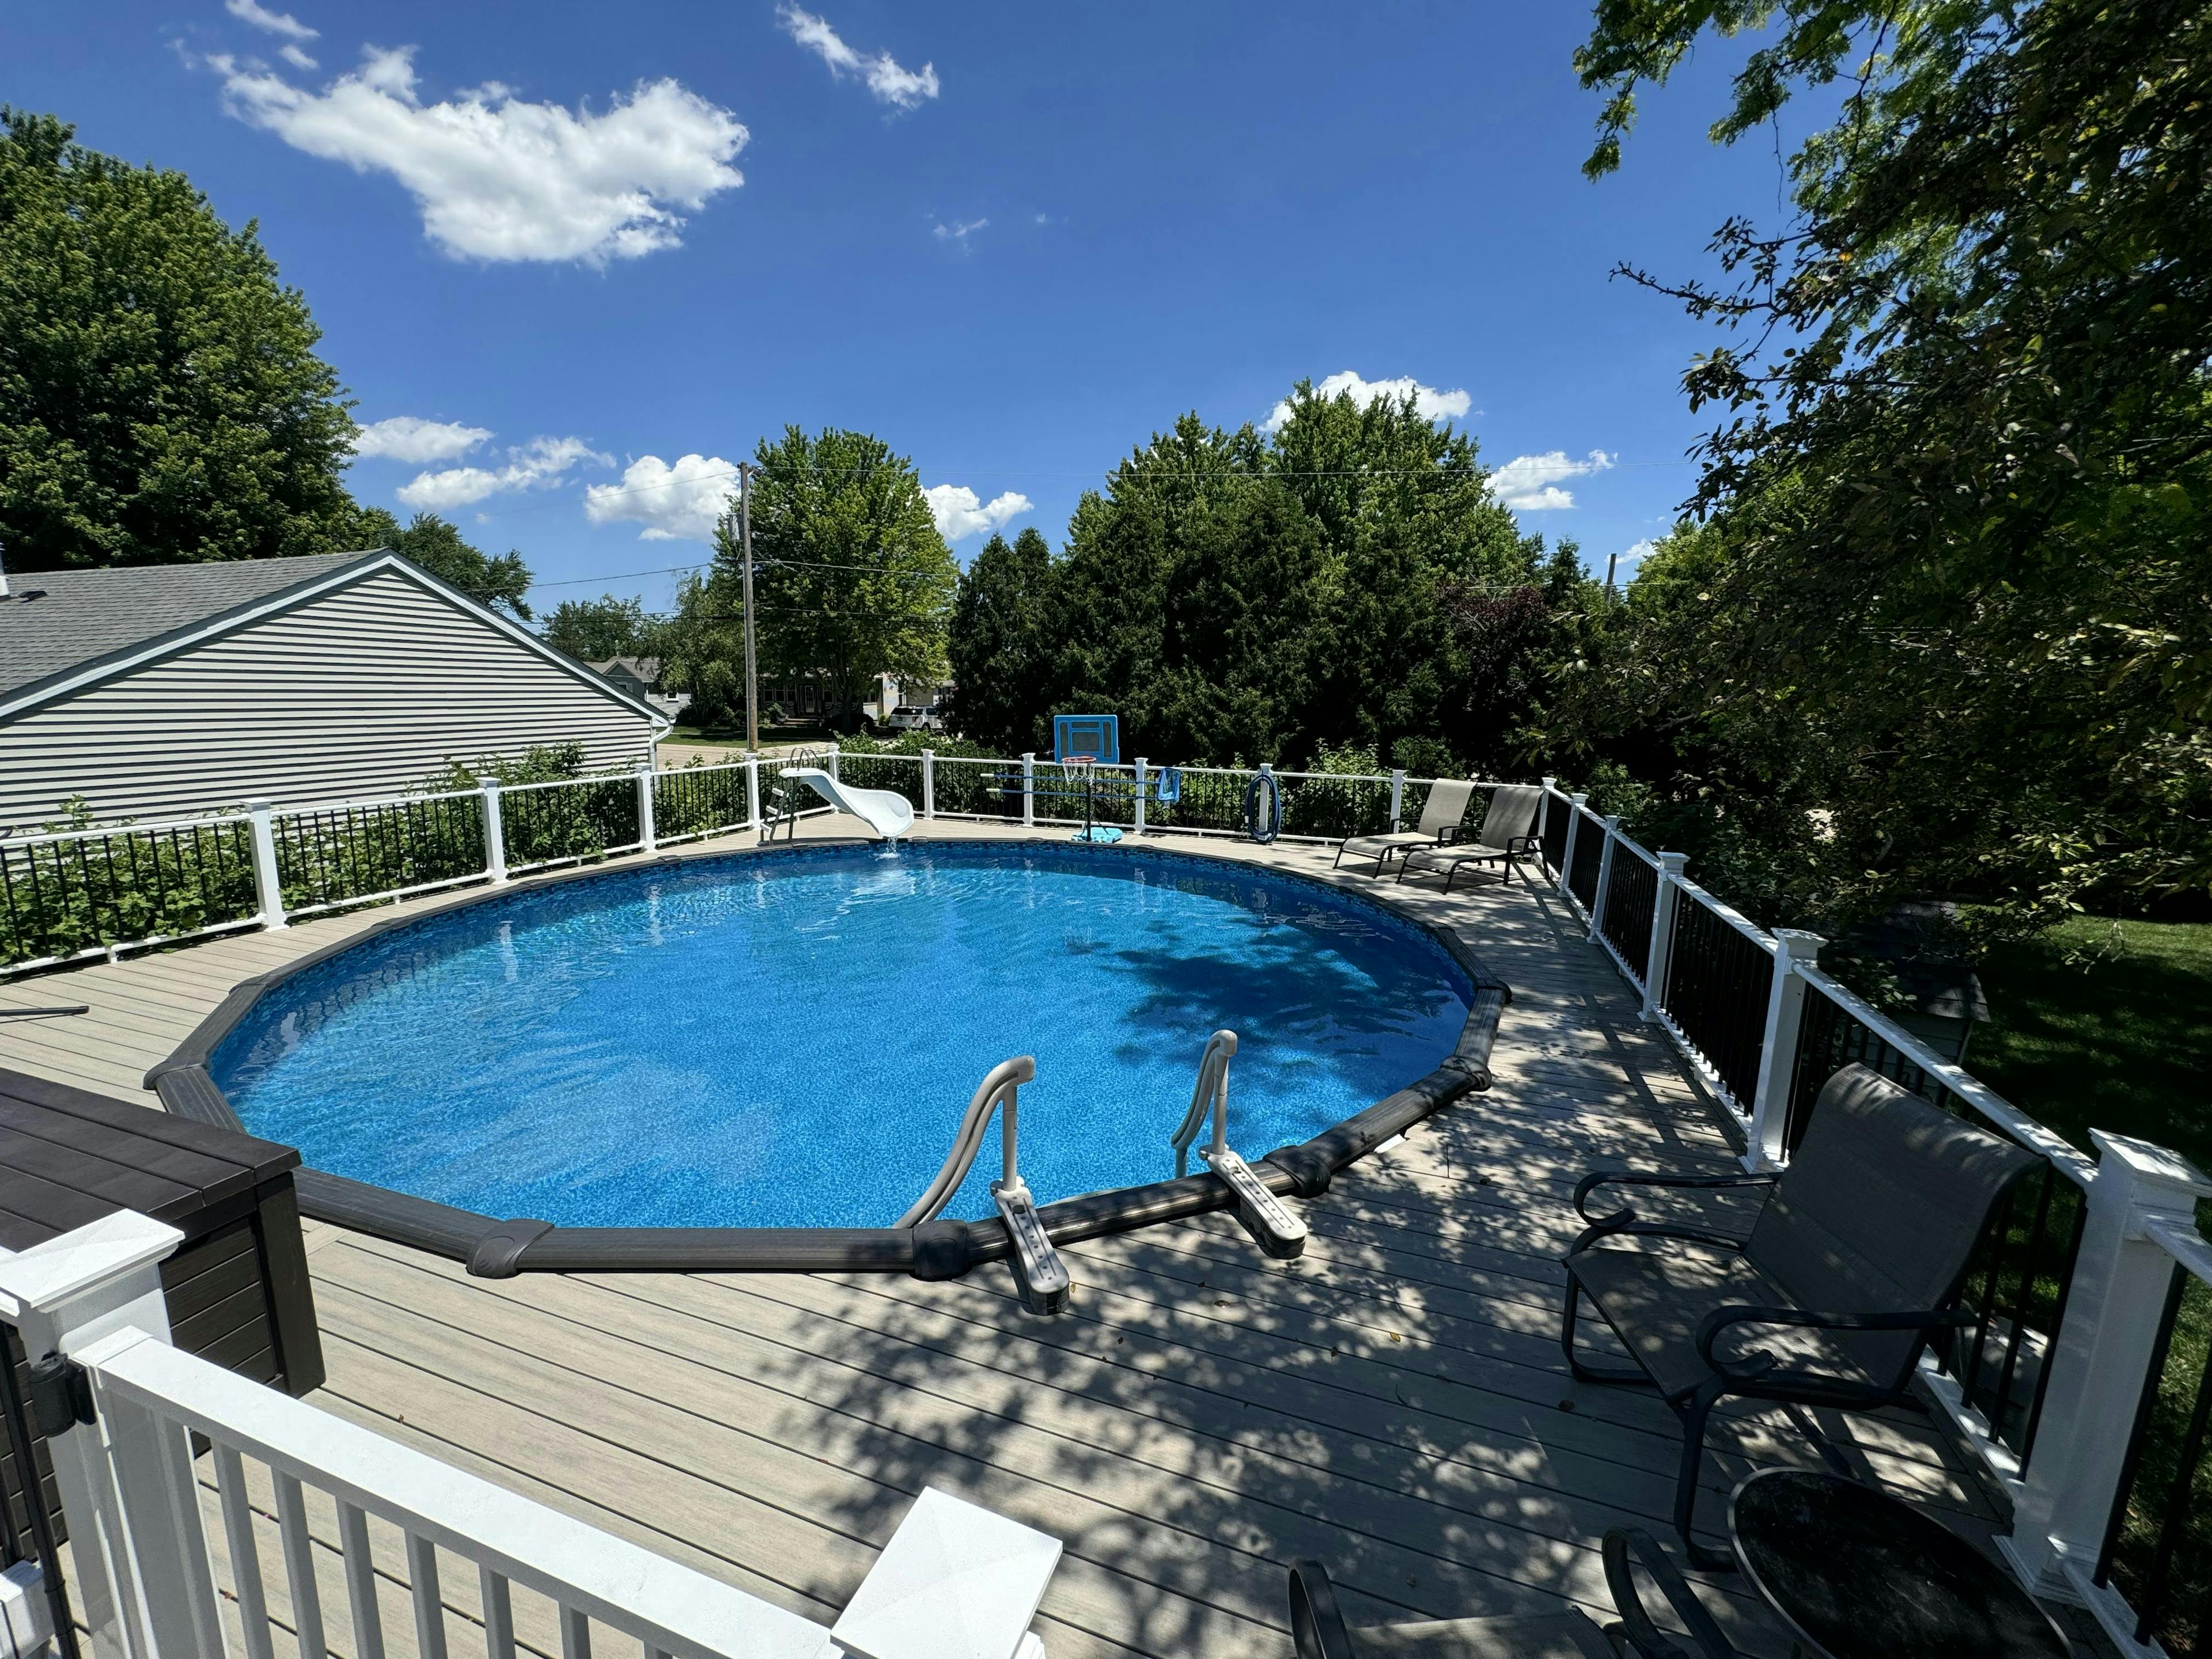 Heated pool, water slide, basketball hoop,  plenty of seating, lounge chairs, huge fenced yard all yours with a real bathroom and privacy.